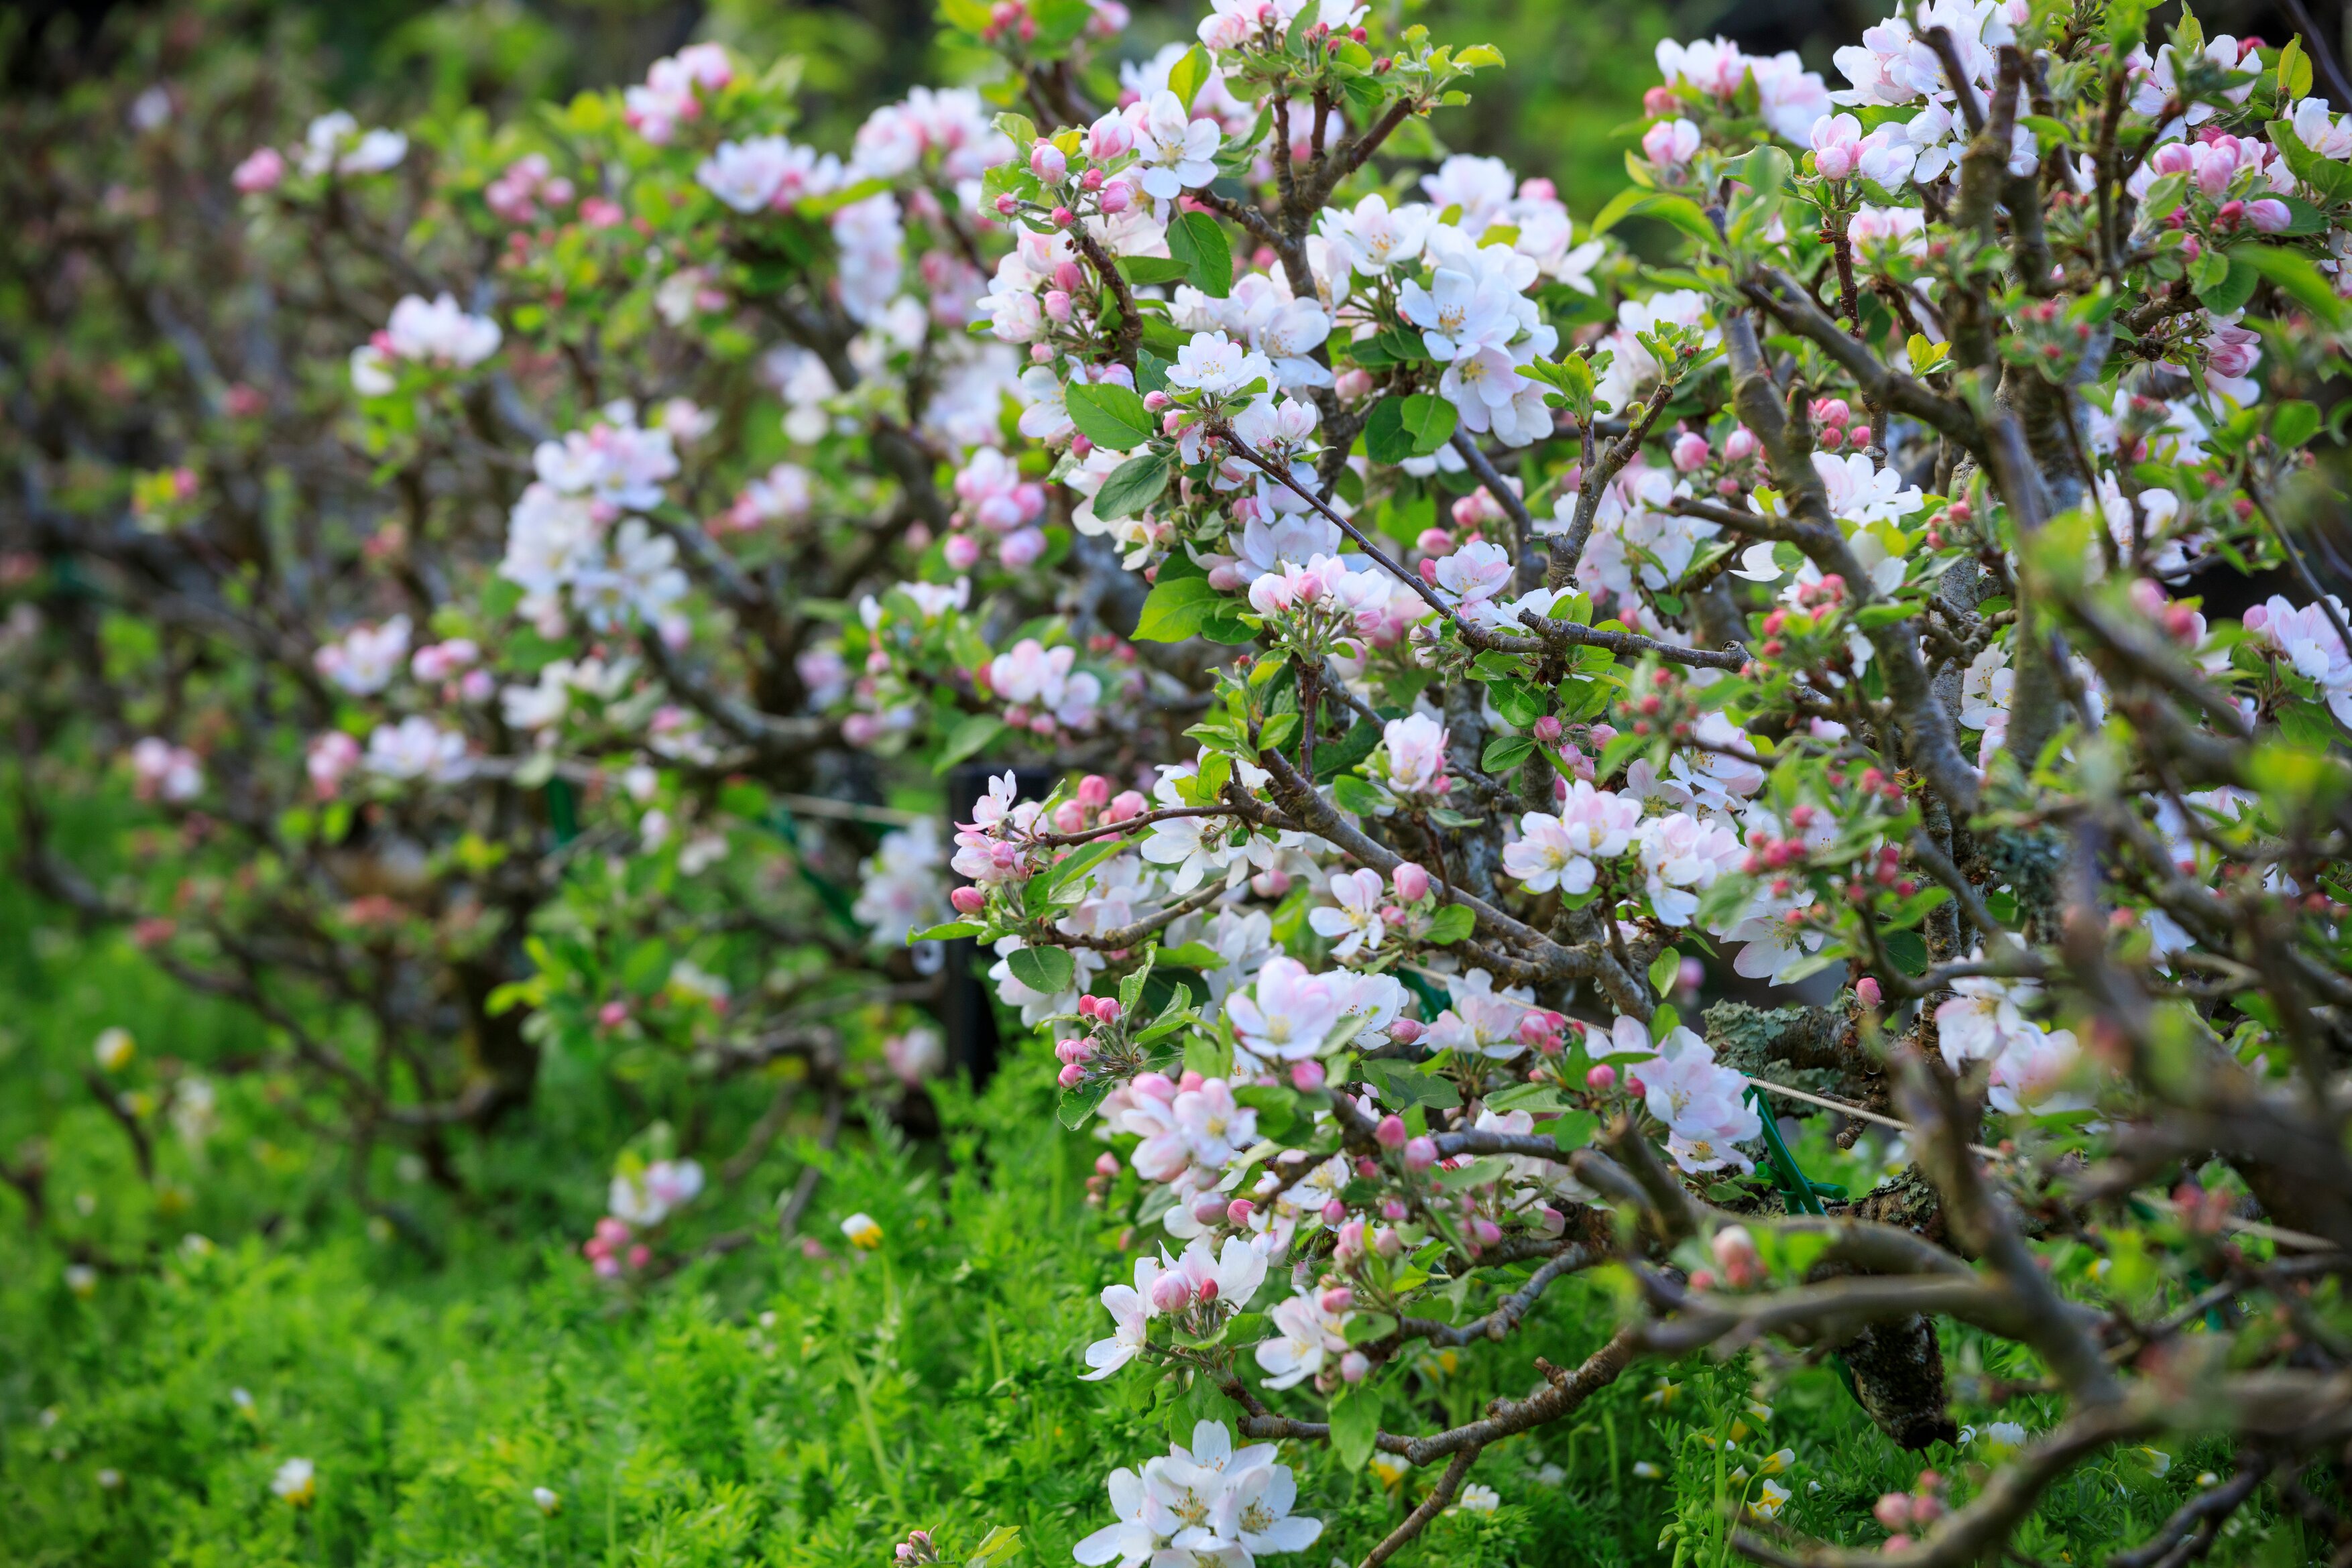 An apple tree in blossom